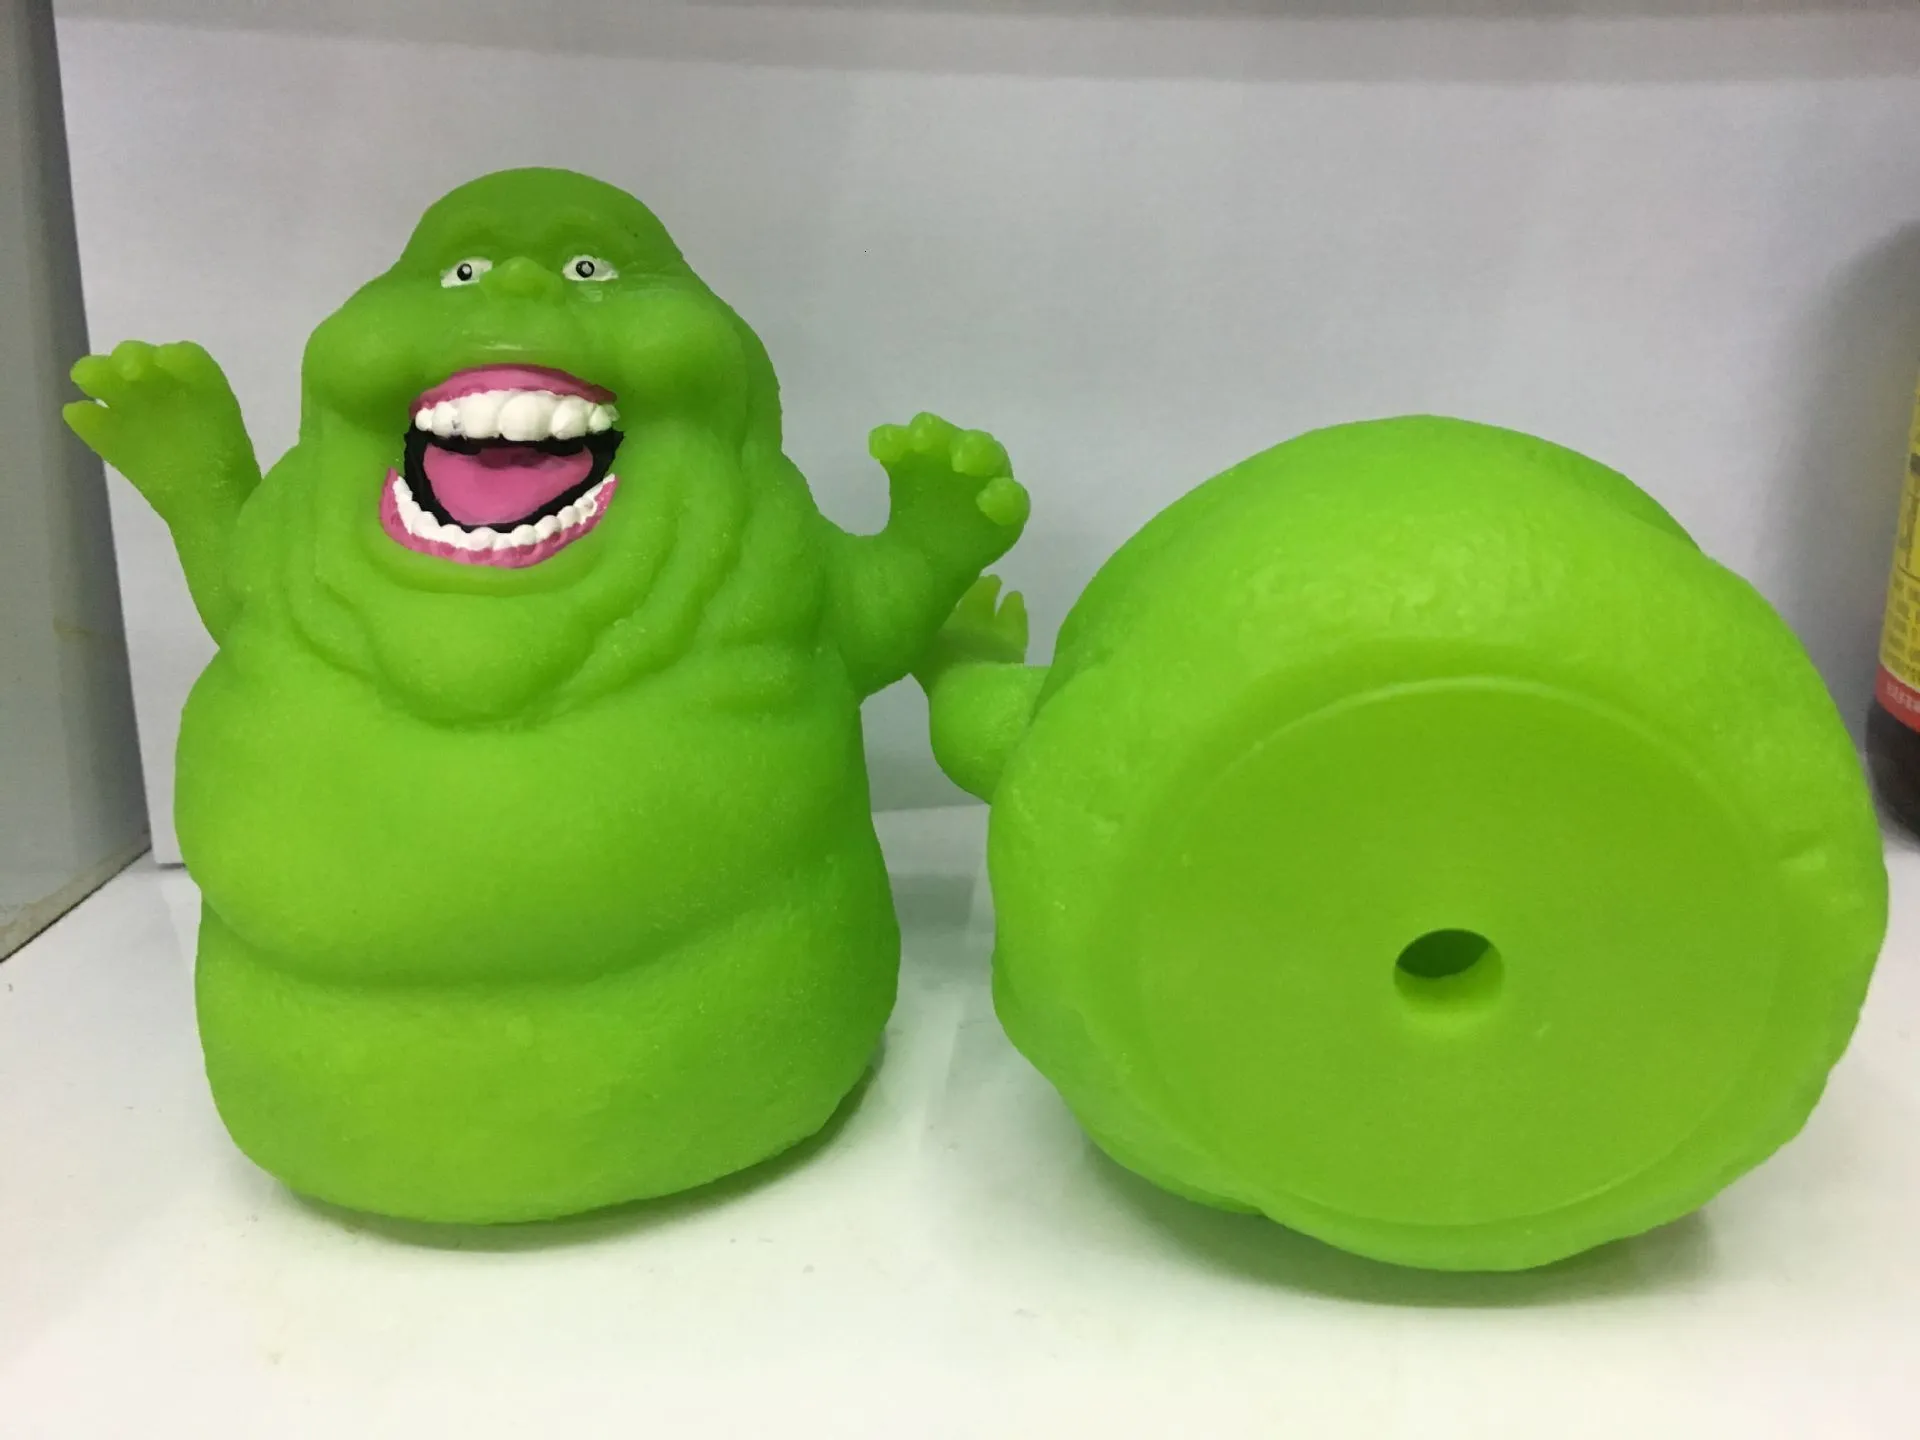 Set Cartoon Anime Ghostbusters Green Ghost Slimer Action Figur Doll PVC Action Figurer Modell BB Knock Toys For Kids Xmas T202841563